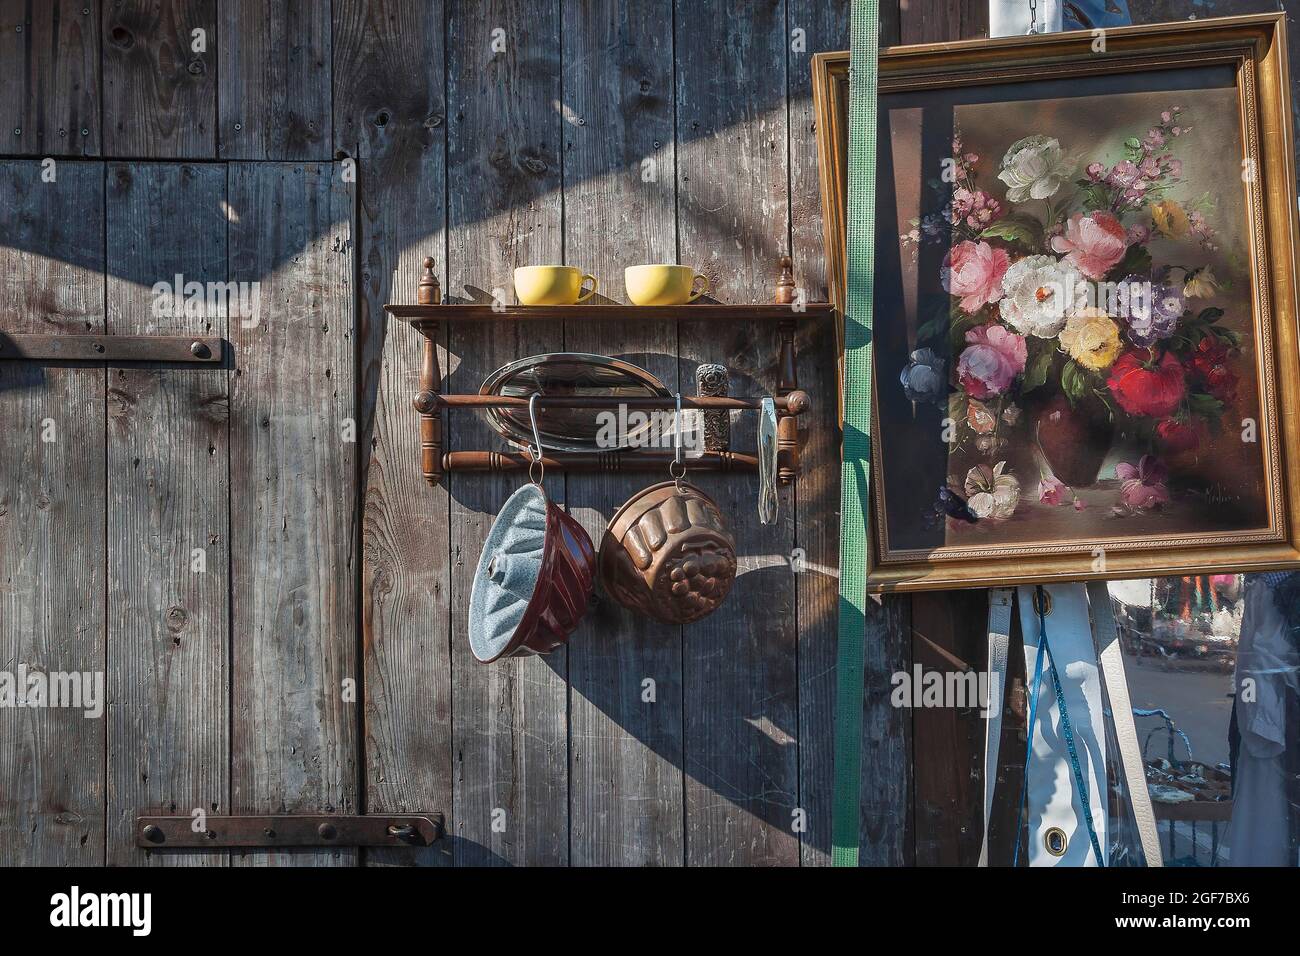 Paintings and bric-a-brac on old wooden wall, Auer Dult, Munich, Bavaria, Germany Stock Photo